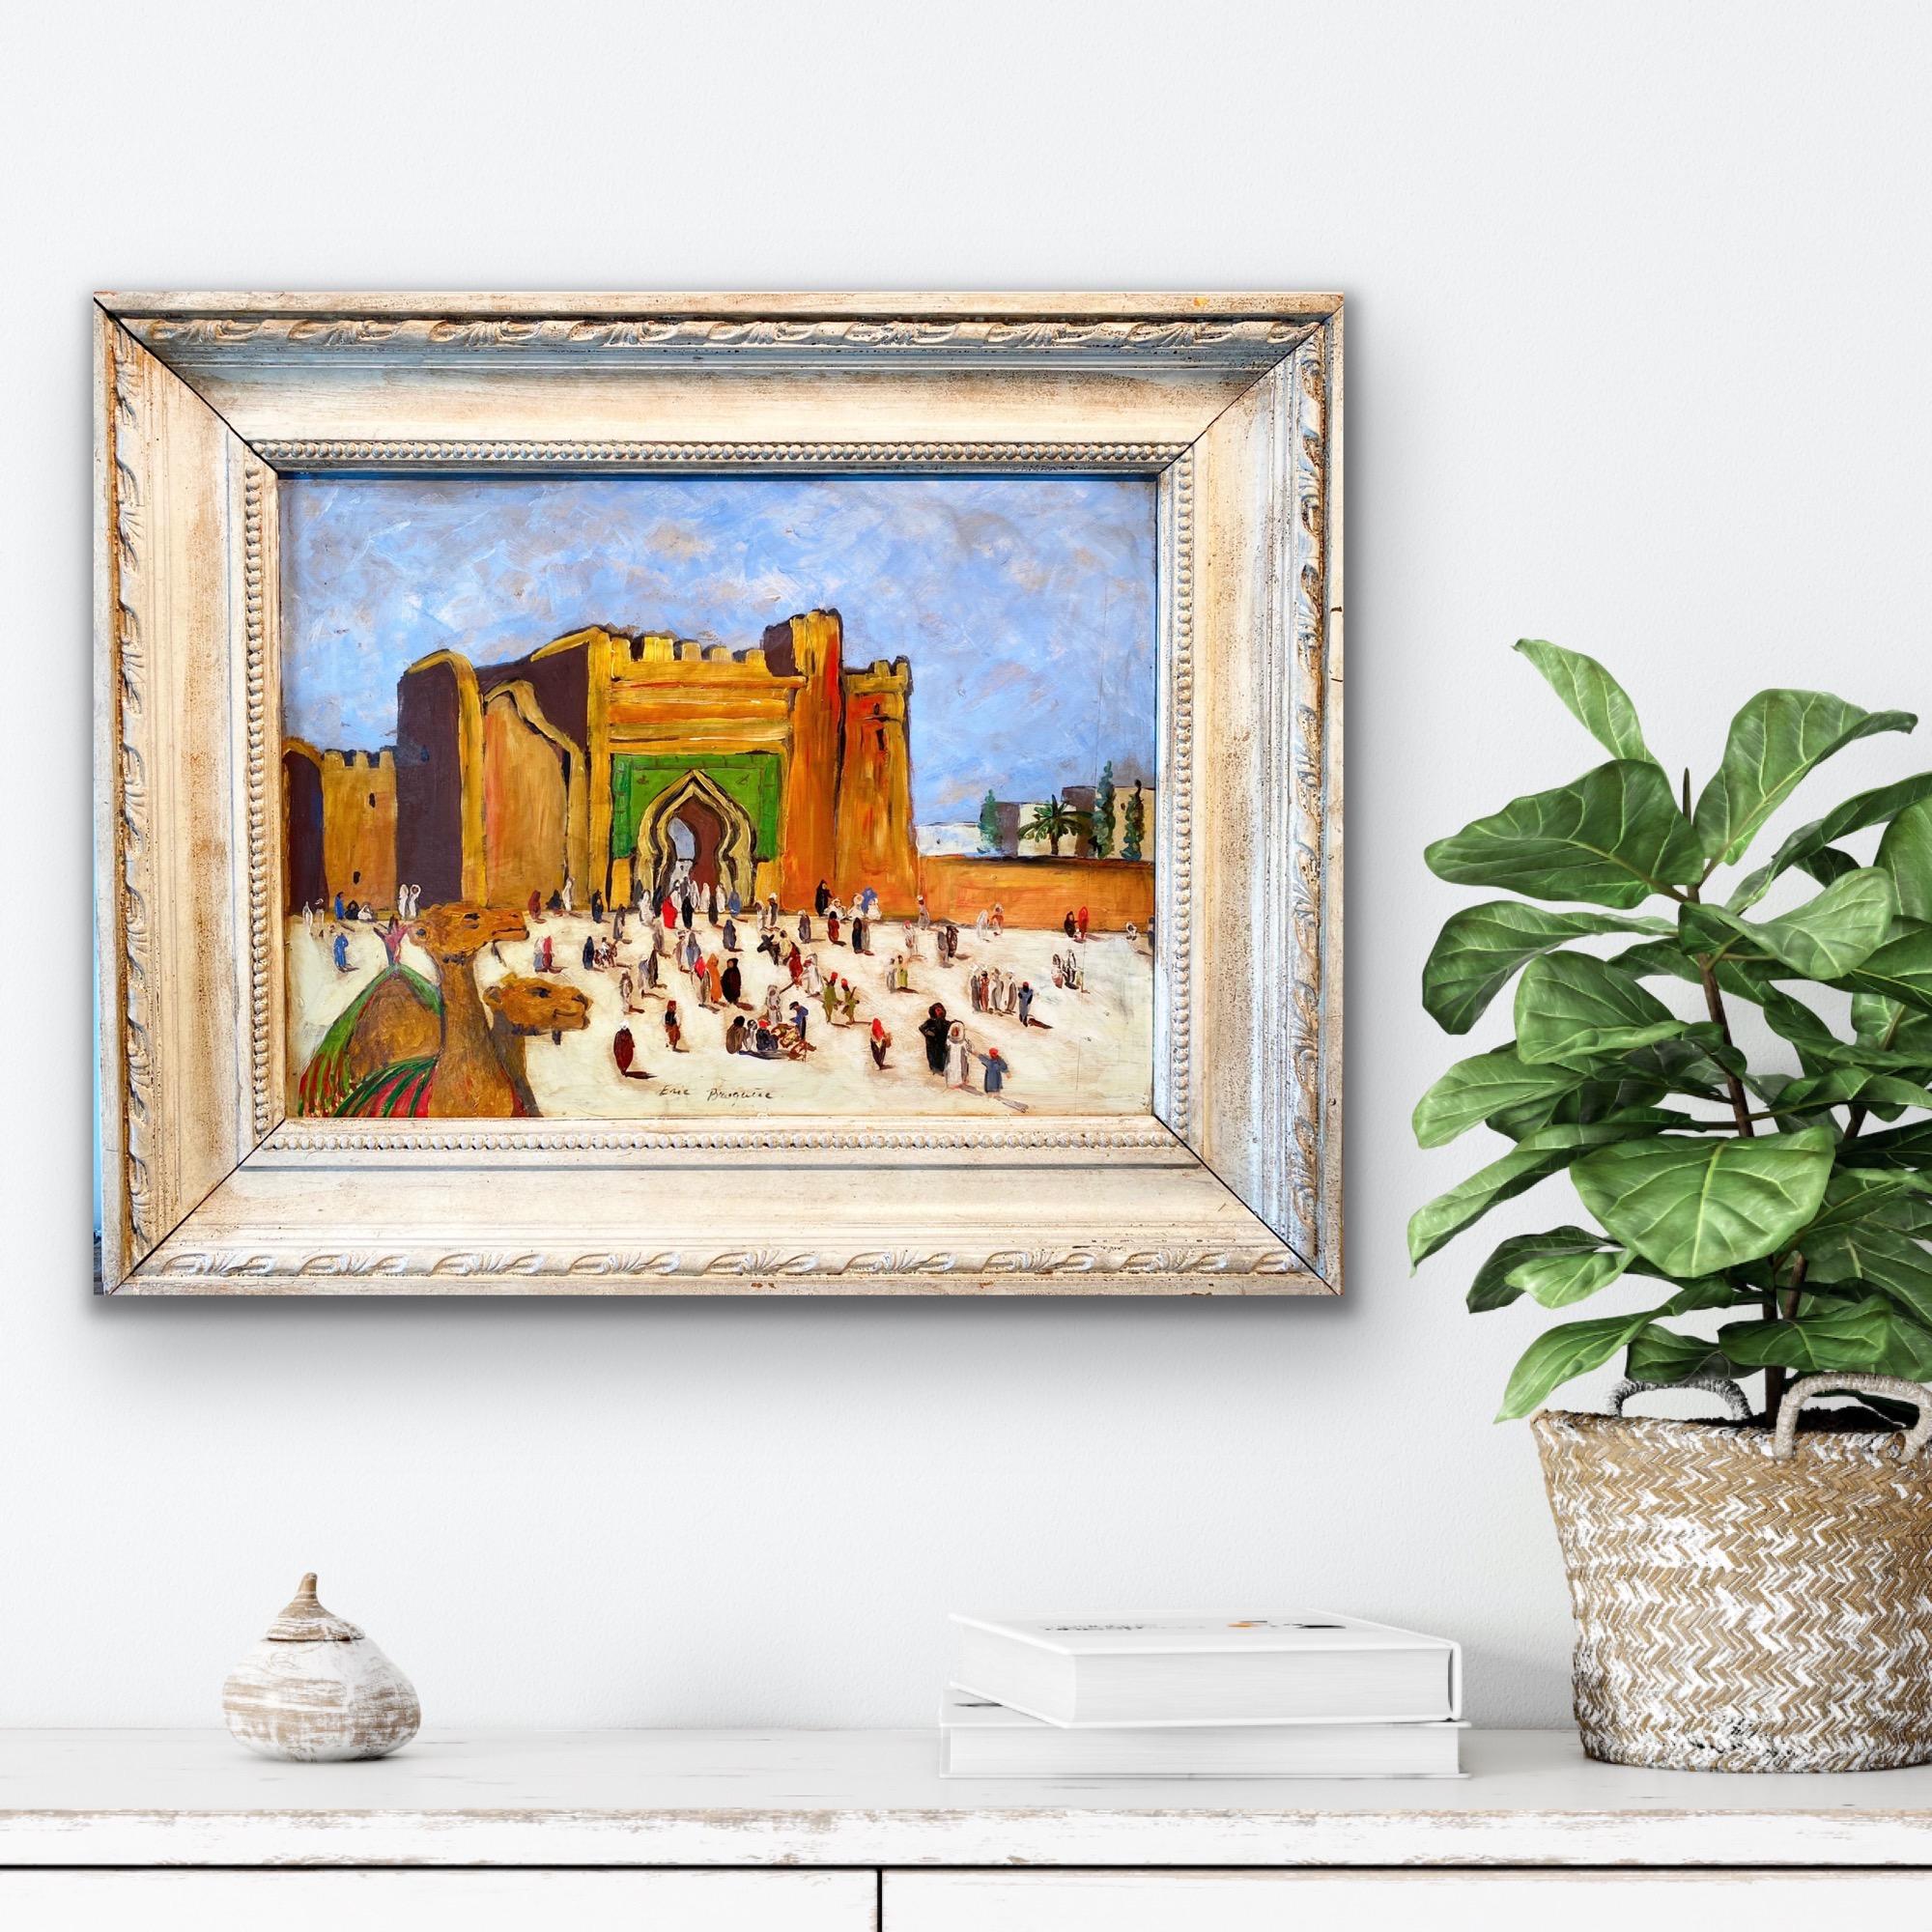 Antique oriental Cityscape painting with a camel - Morocco - Figurative Exotic - Painting by Eric Bruguère